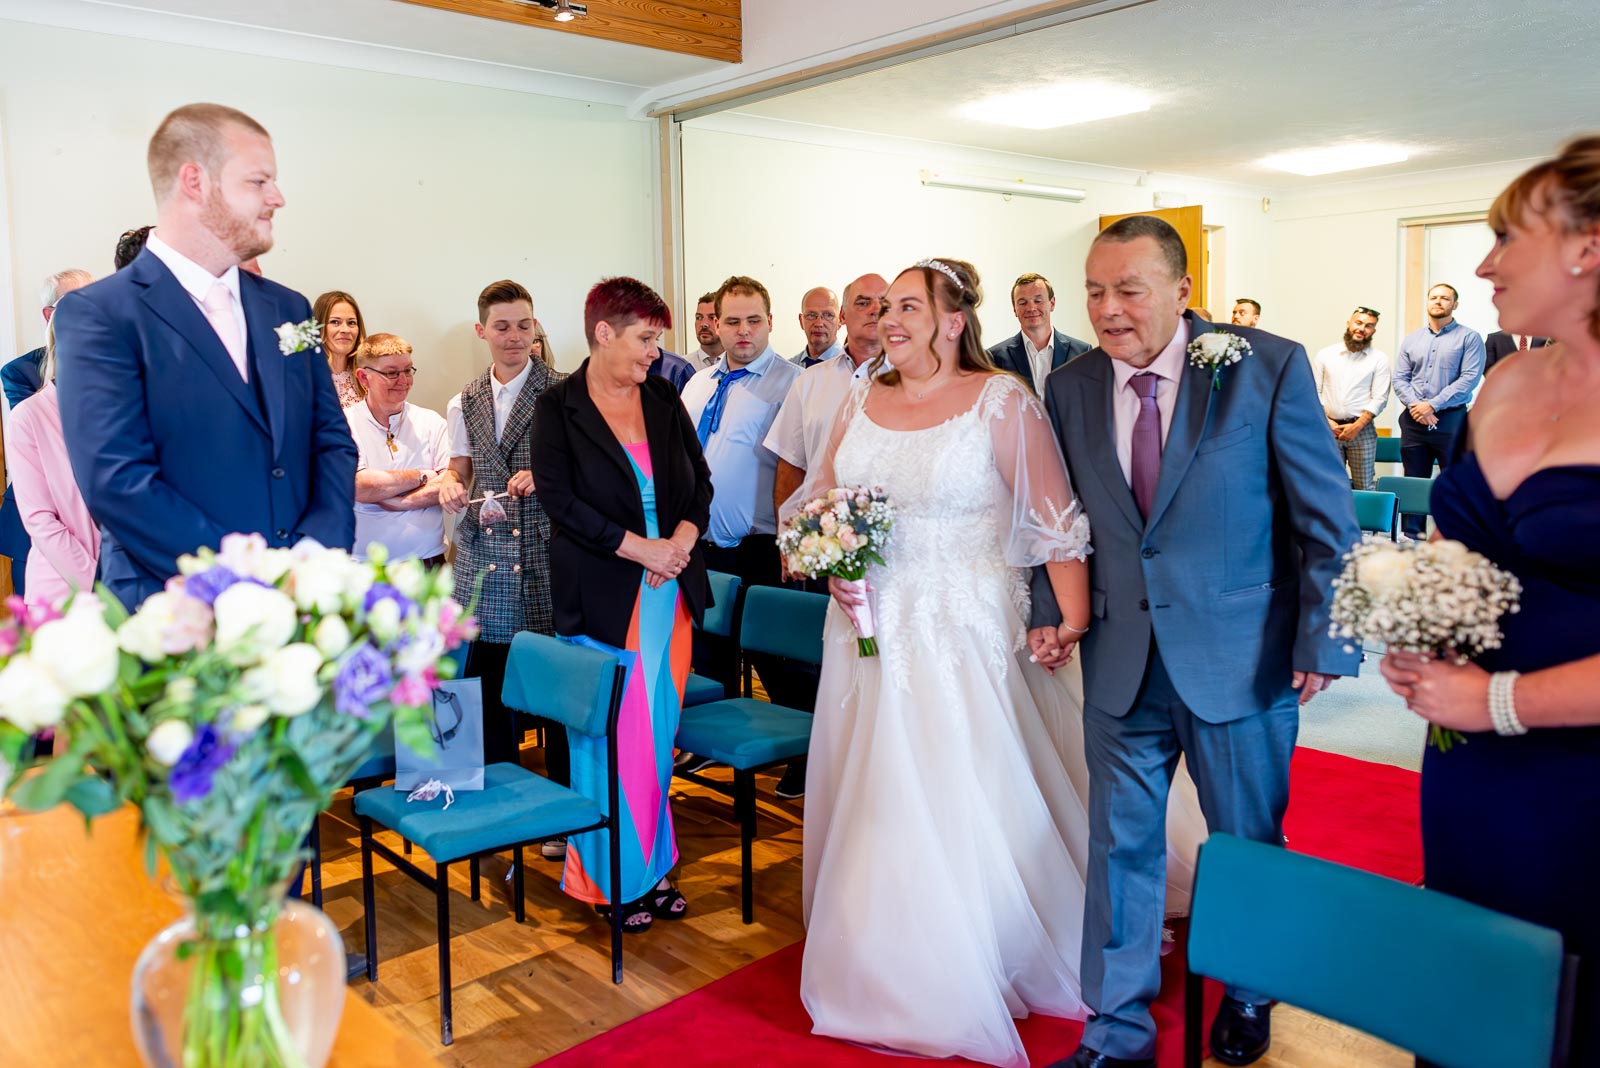 Catherine walks down the aisle with her dad at Haywards Heath Town Hall  to get married to Steve